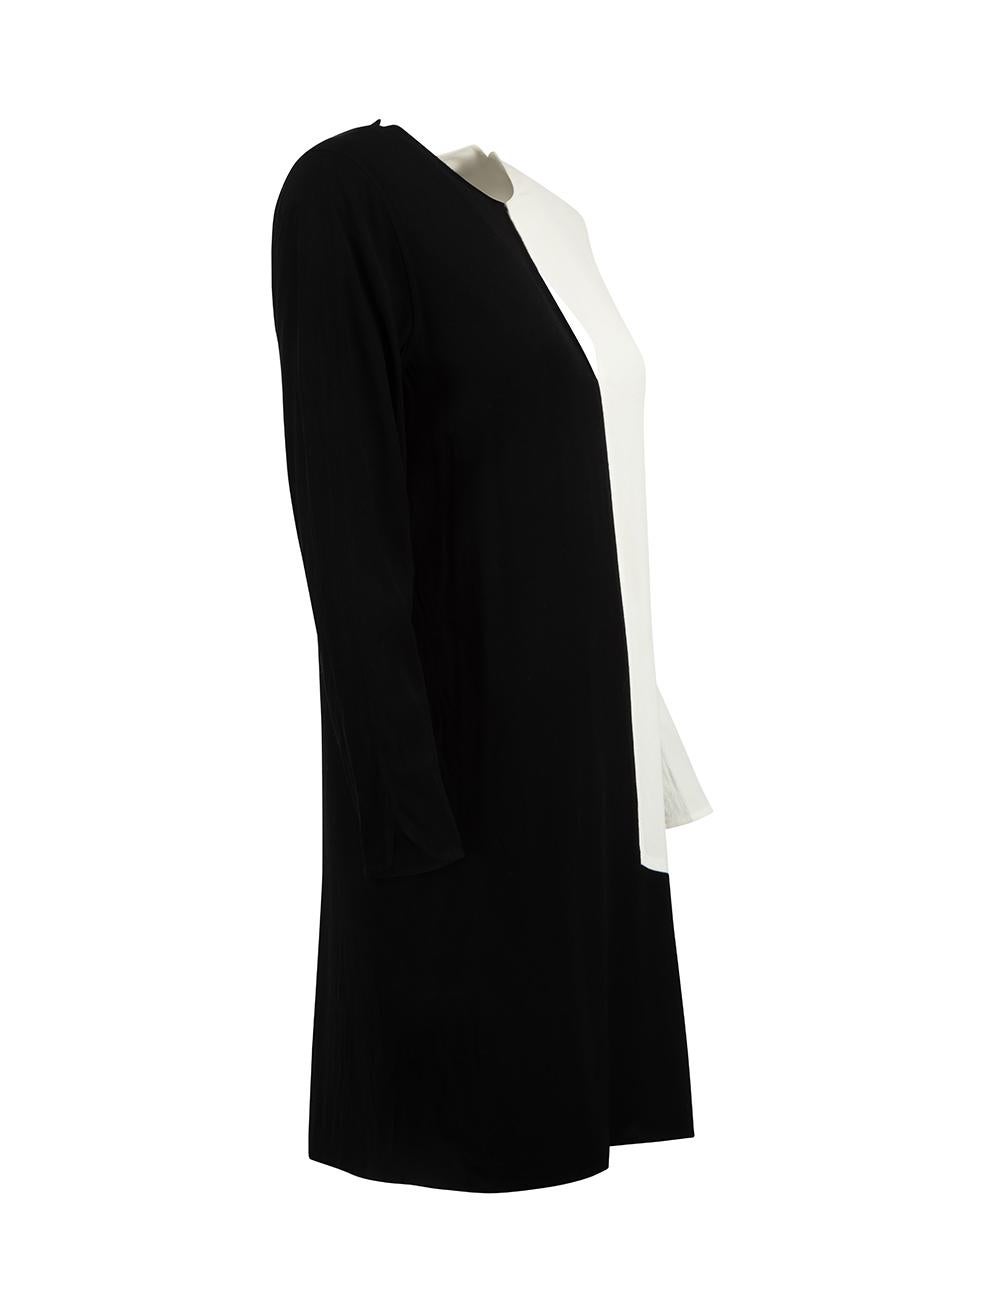 CONDITION is Very good. Hardly any visible wear to this used Equipment Femme designer resale item.



Details


Black & white

Viscose

Mini dress

Long sleeved

White colour block panel

Round neckline

1x Button fastening on the front

Keyhole